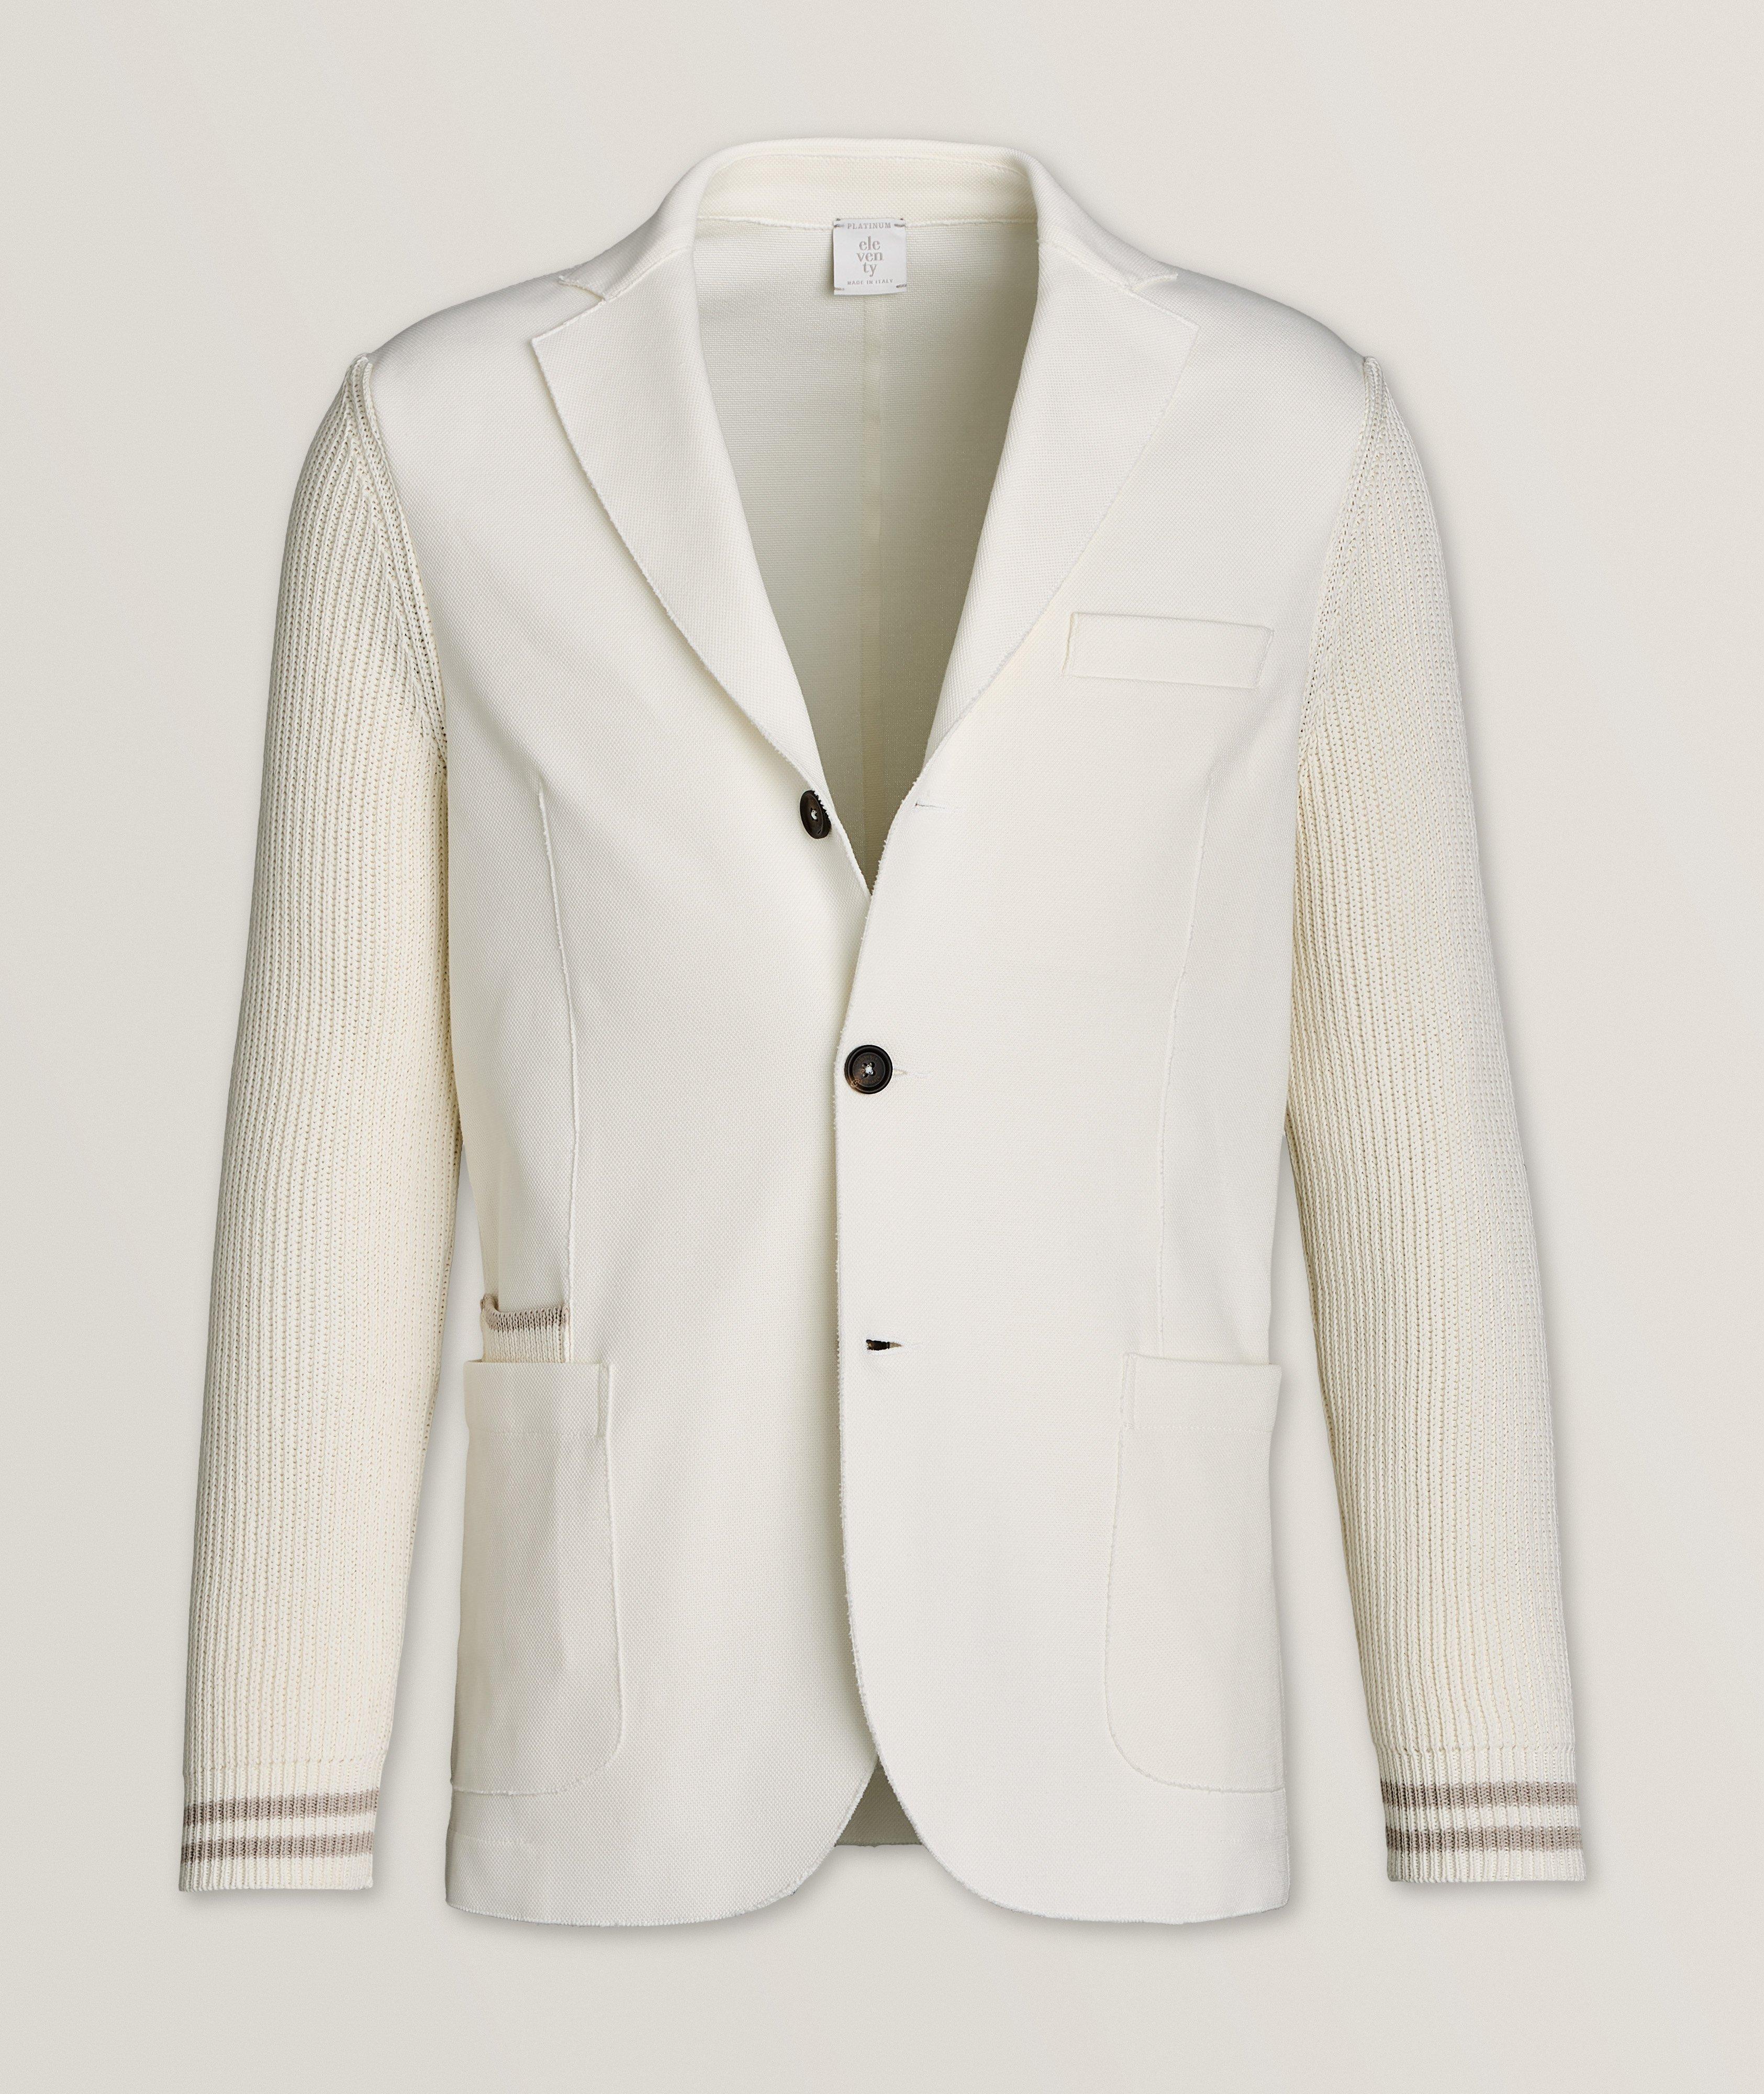 Platinum Collection Mixed Material Sport Jacket